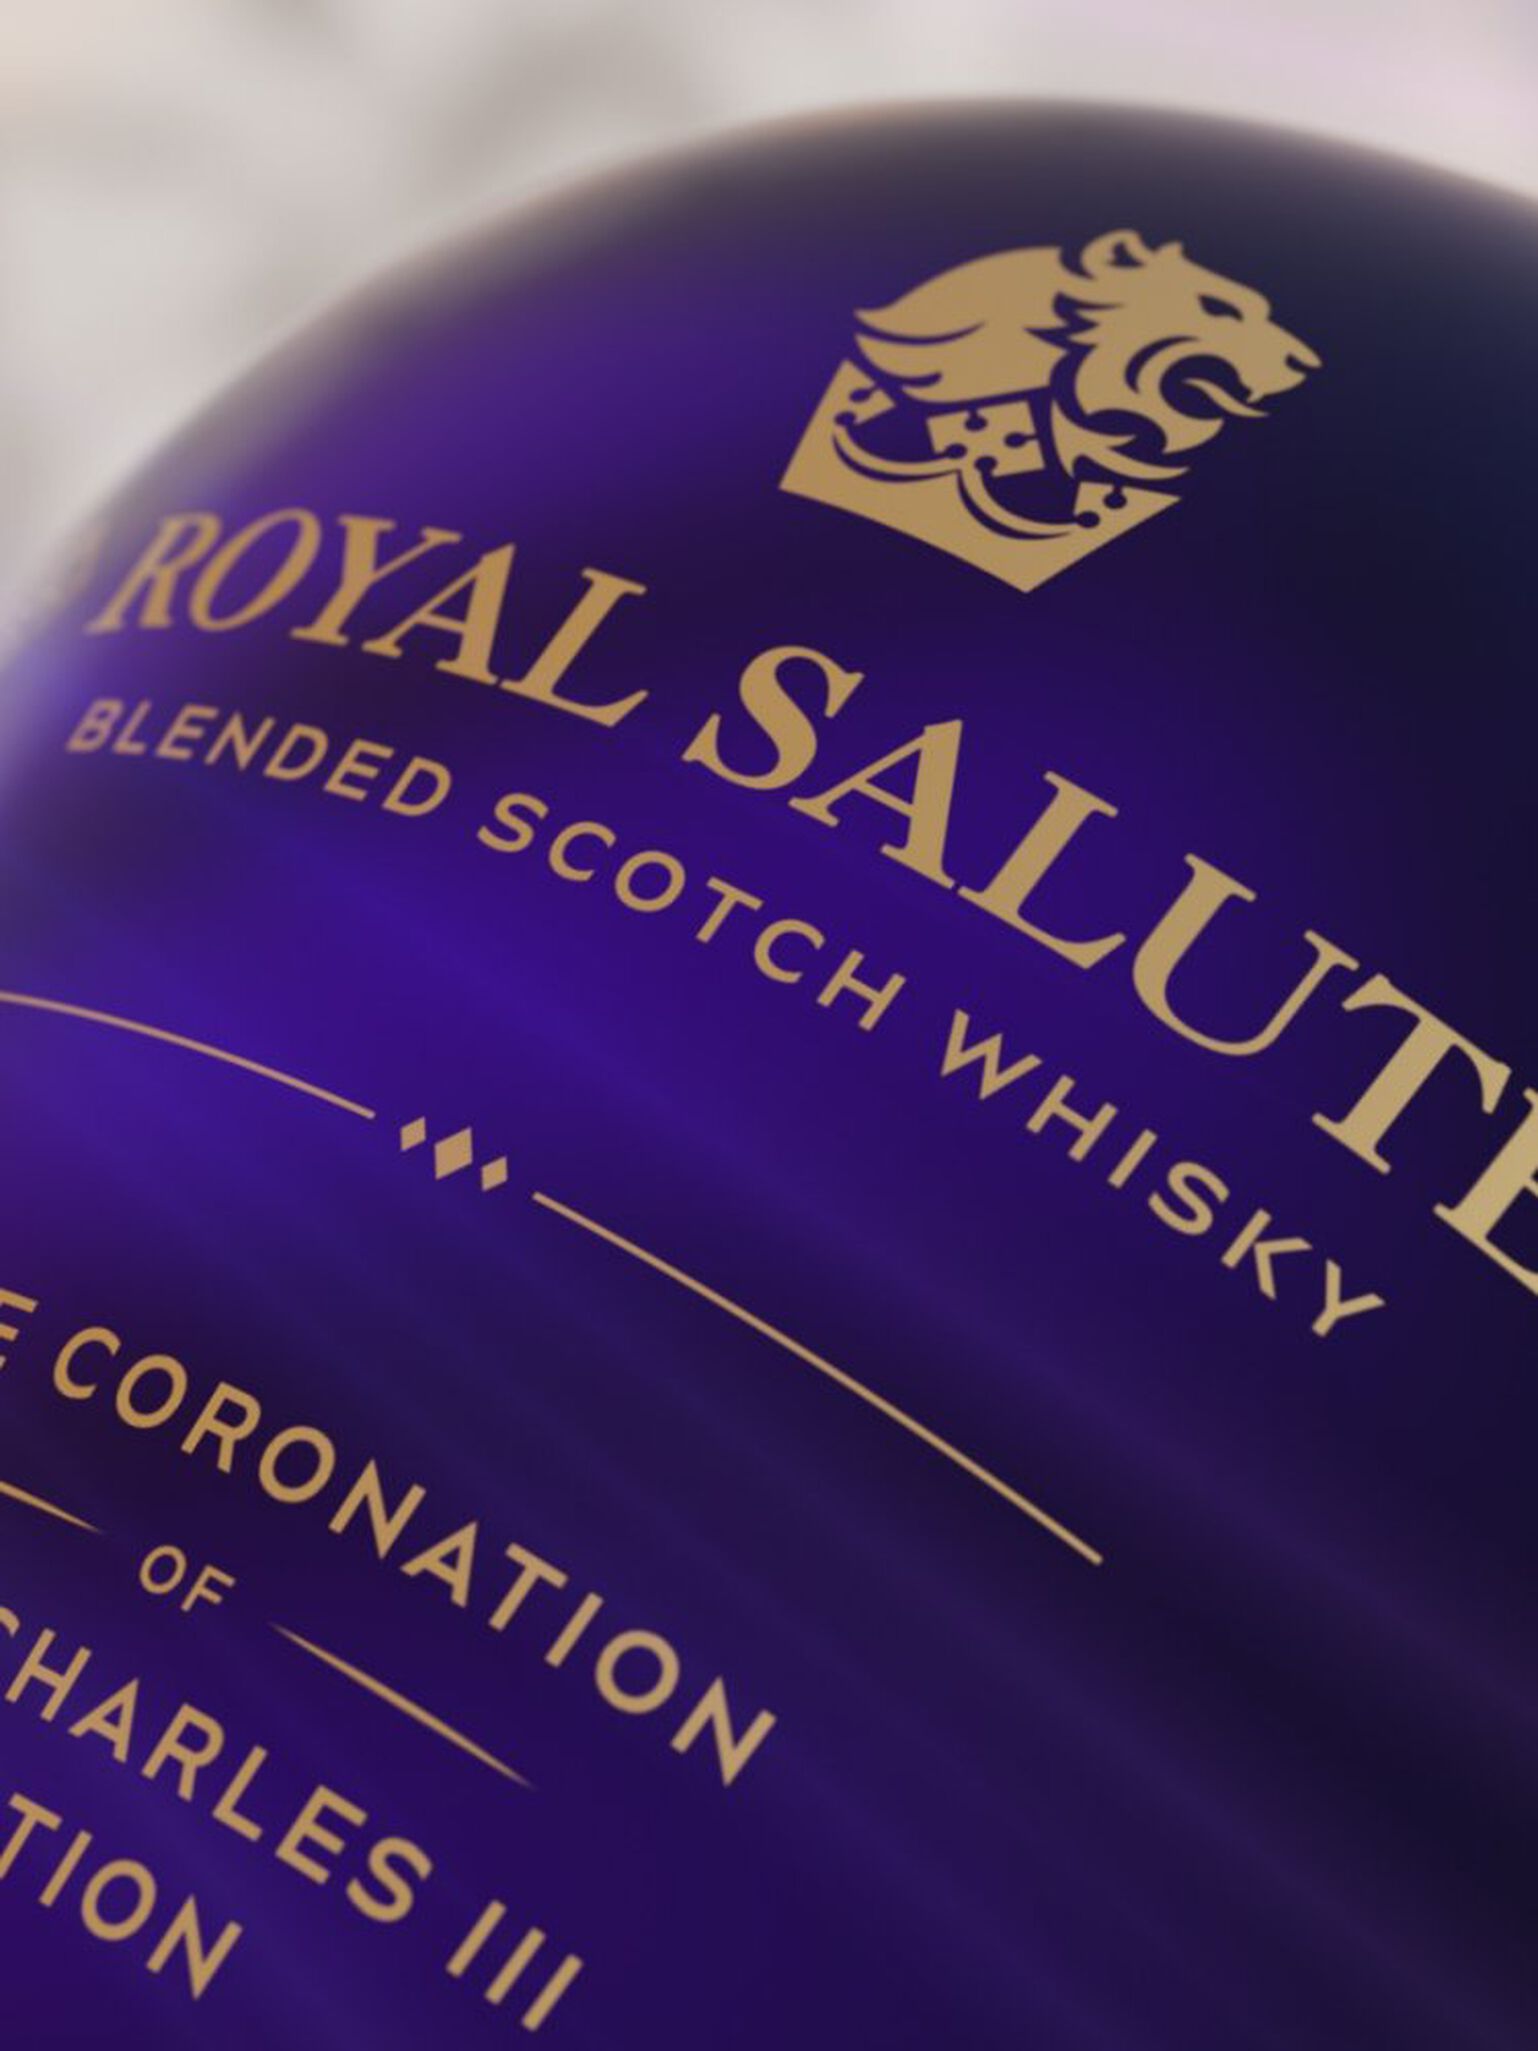 Royal Salute The Coronation of King Charles the third Edition Scotch Whisky